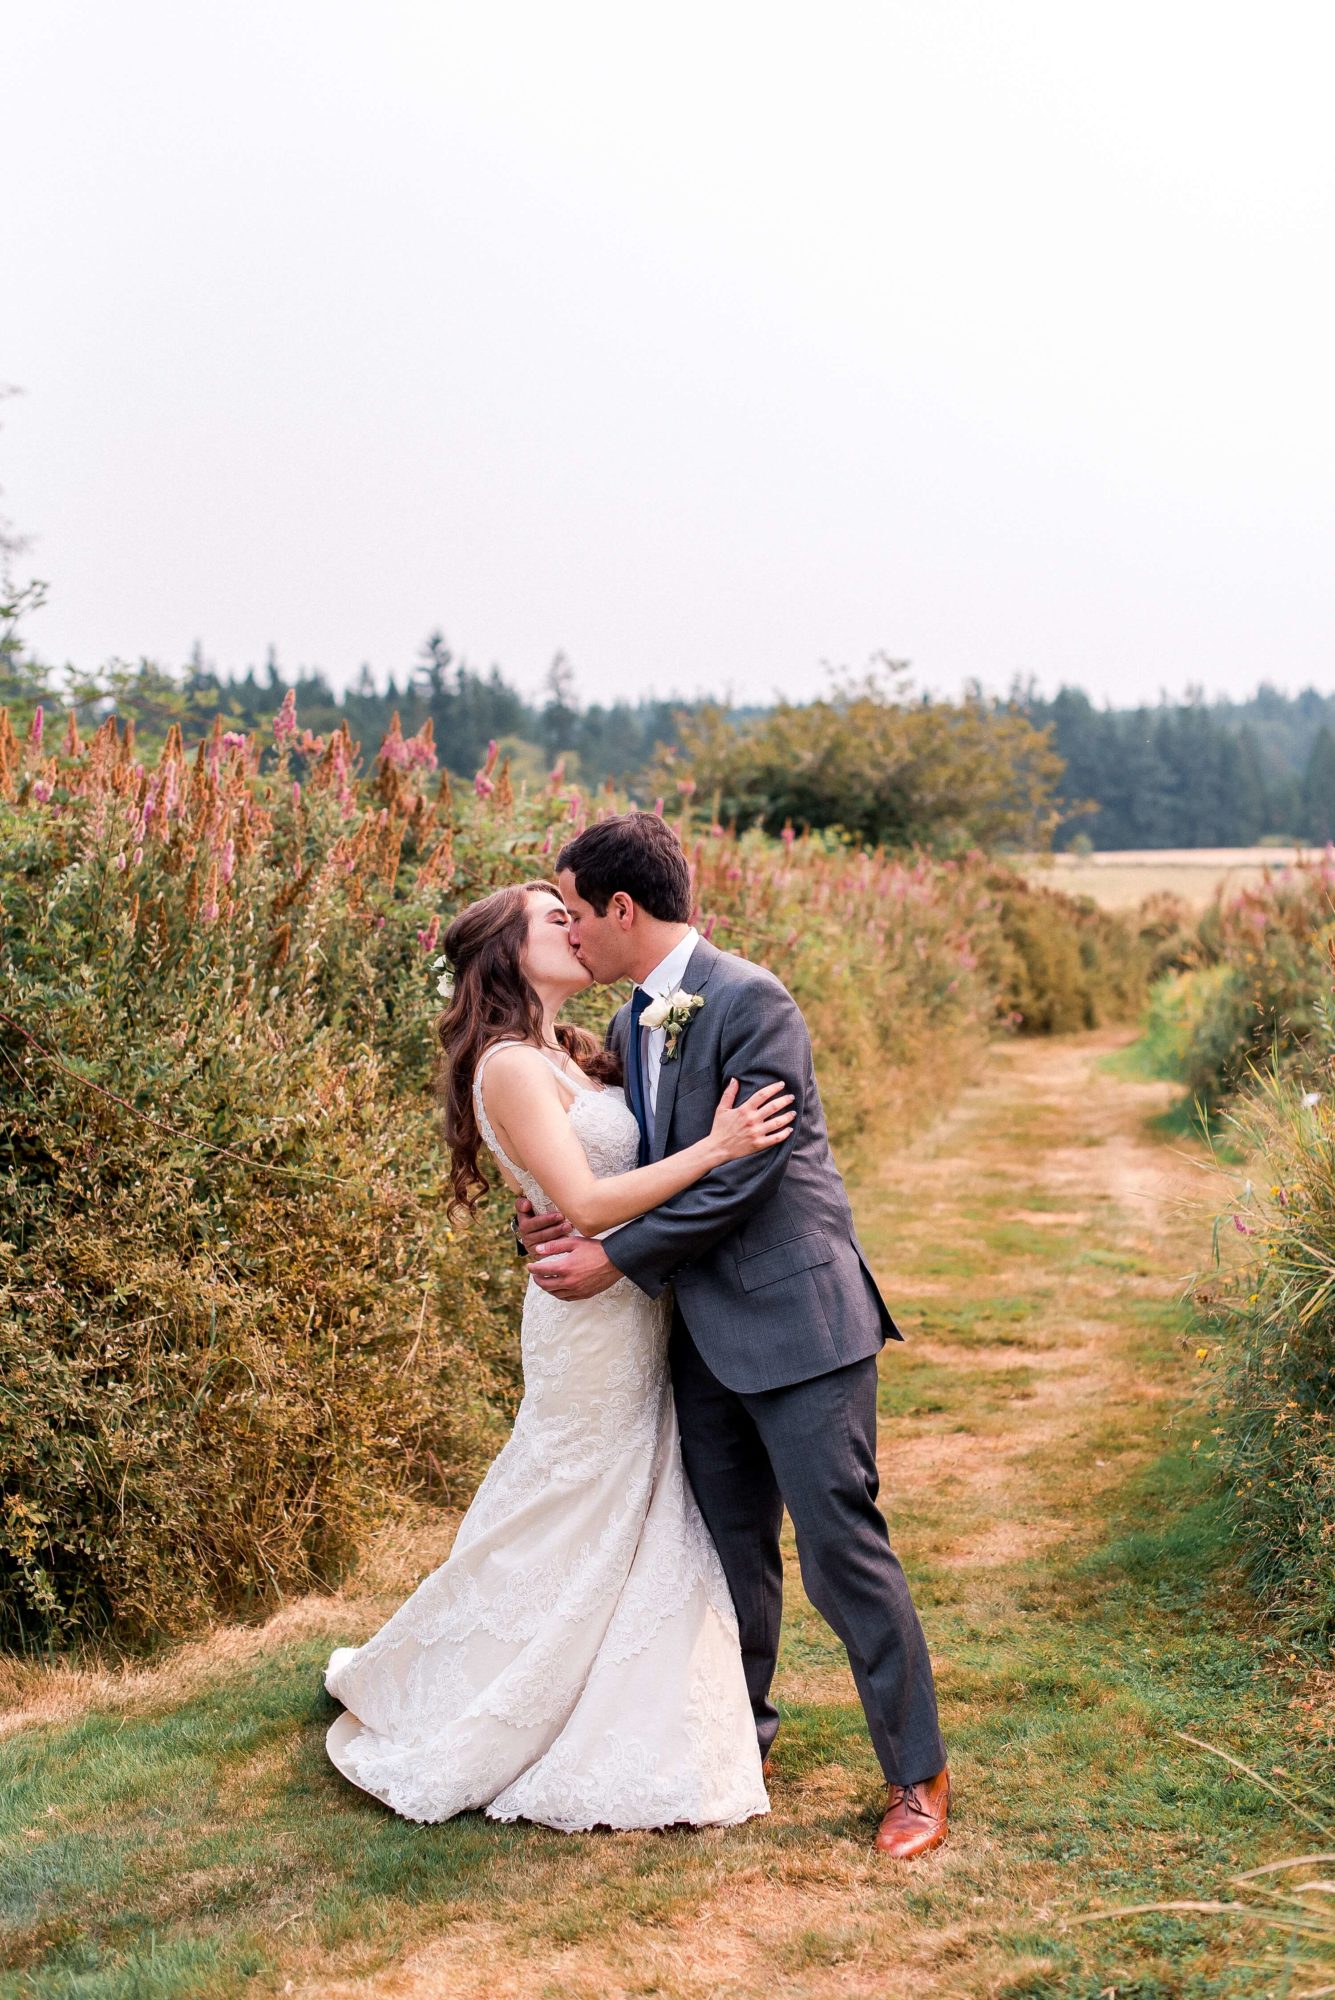 bride and groom kiss in winding grass path through flowers